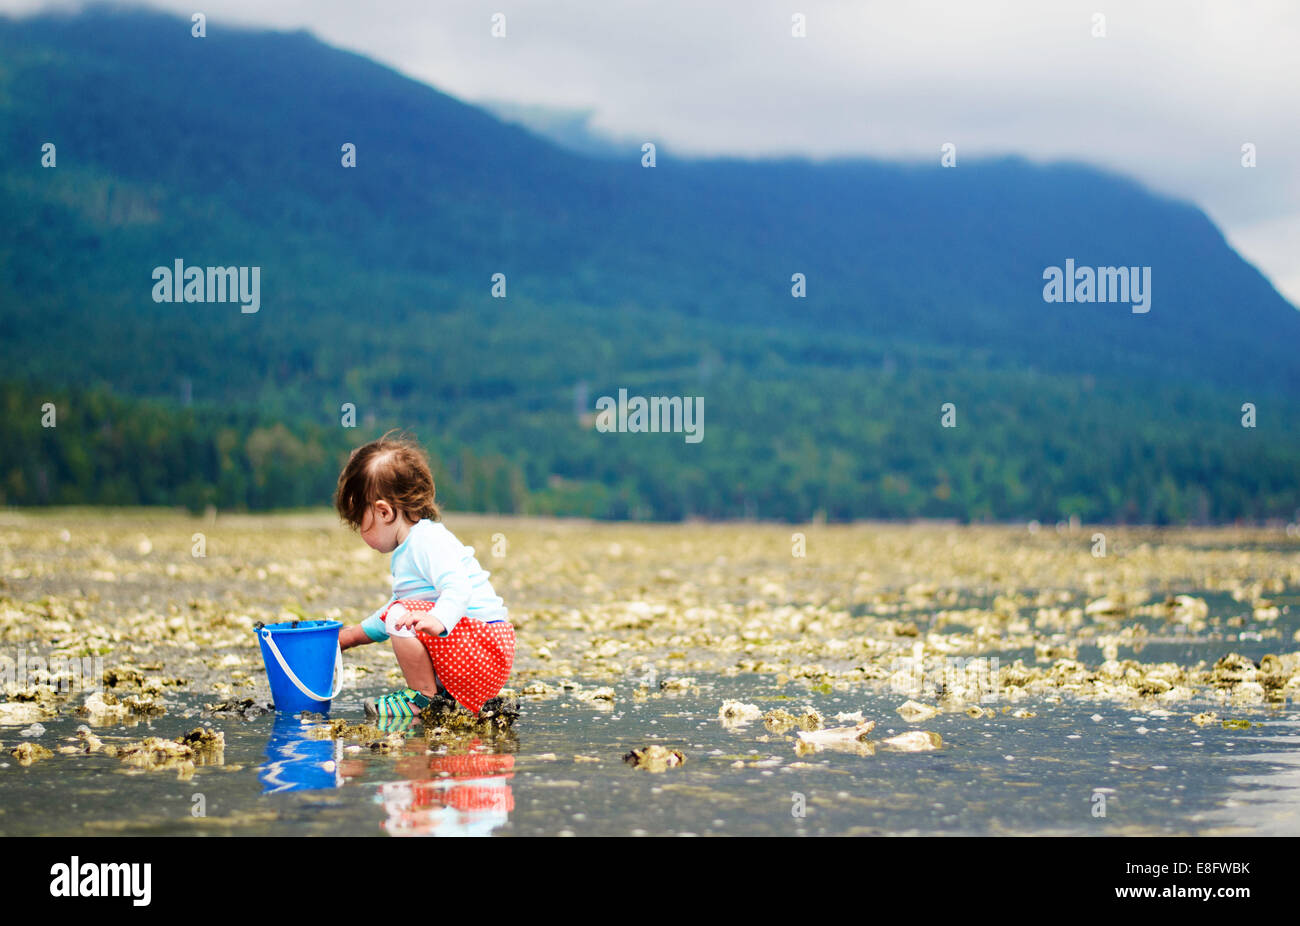 Girl crouching down collecting things on the beach, USA Stock Photo